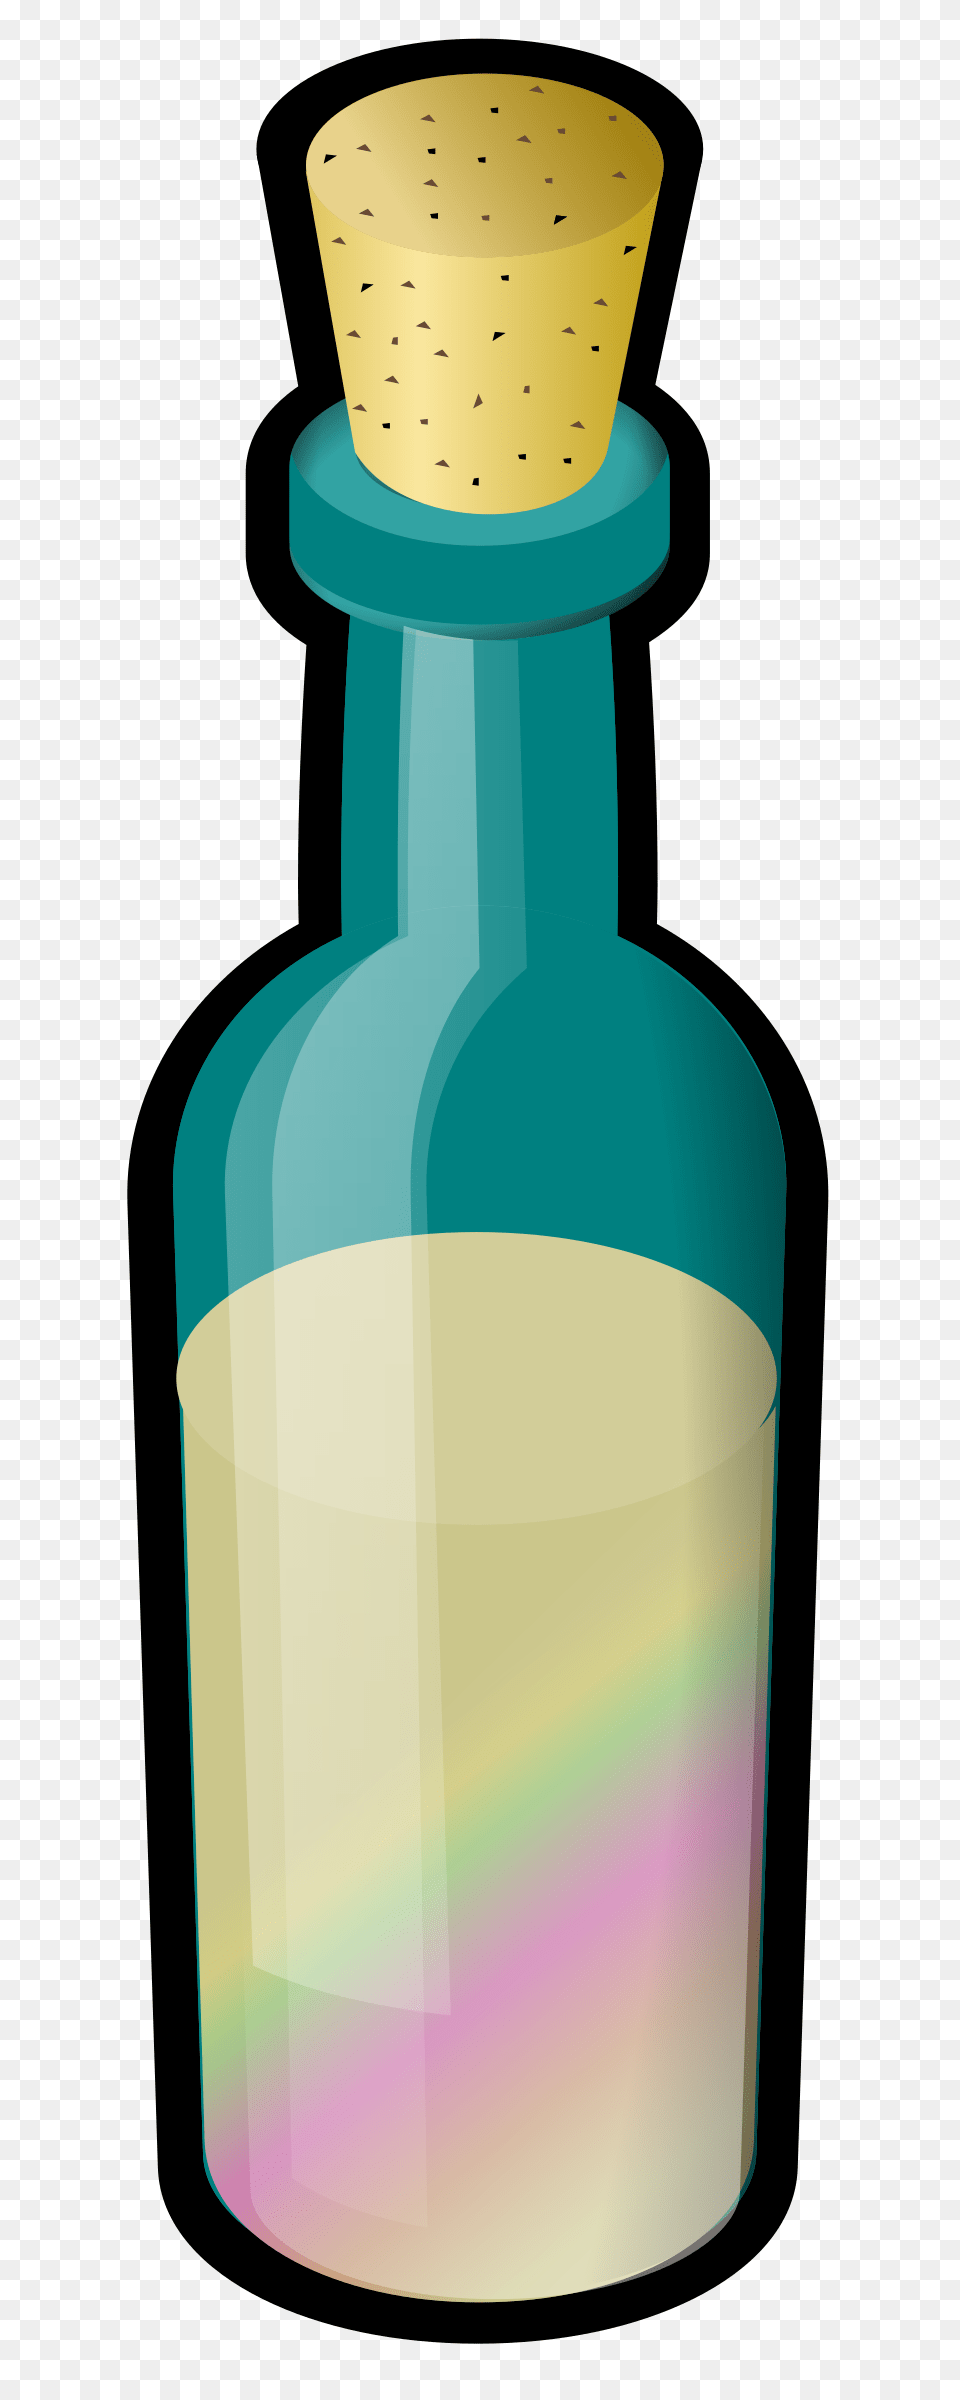 Bottle Of Colored Sand With Cork Icons, Cosmetics, Perfume Free Transparent Png